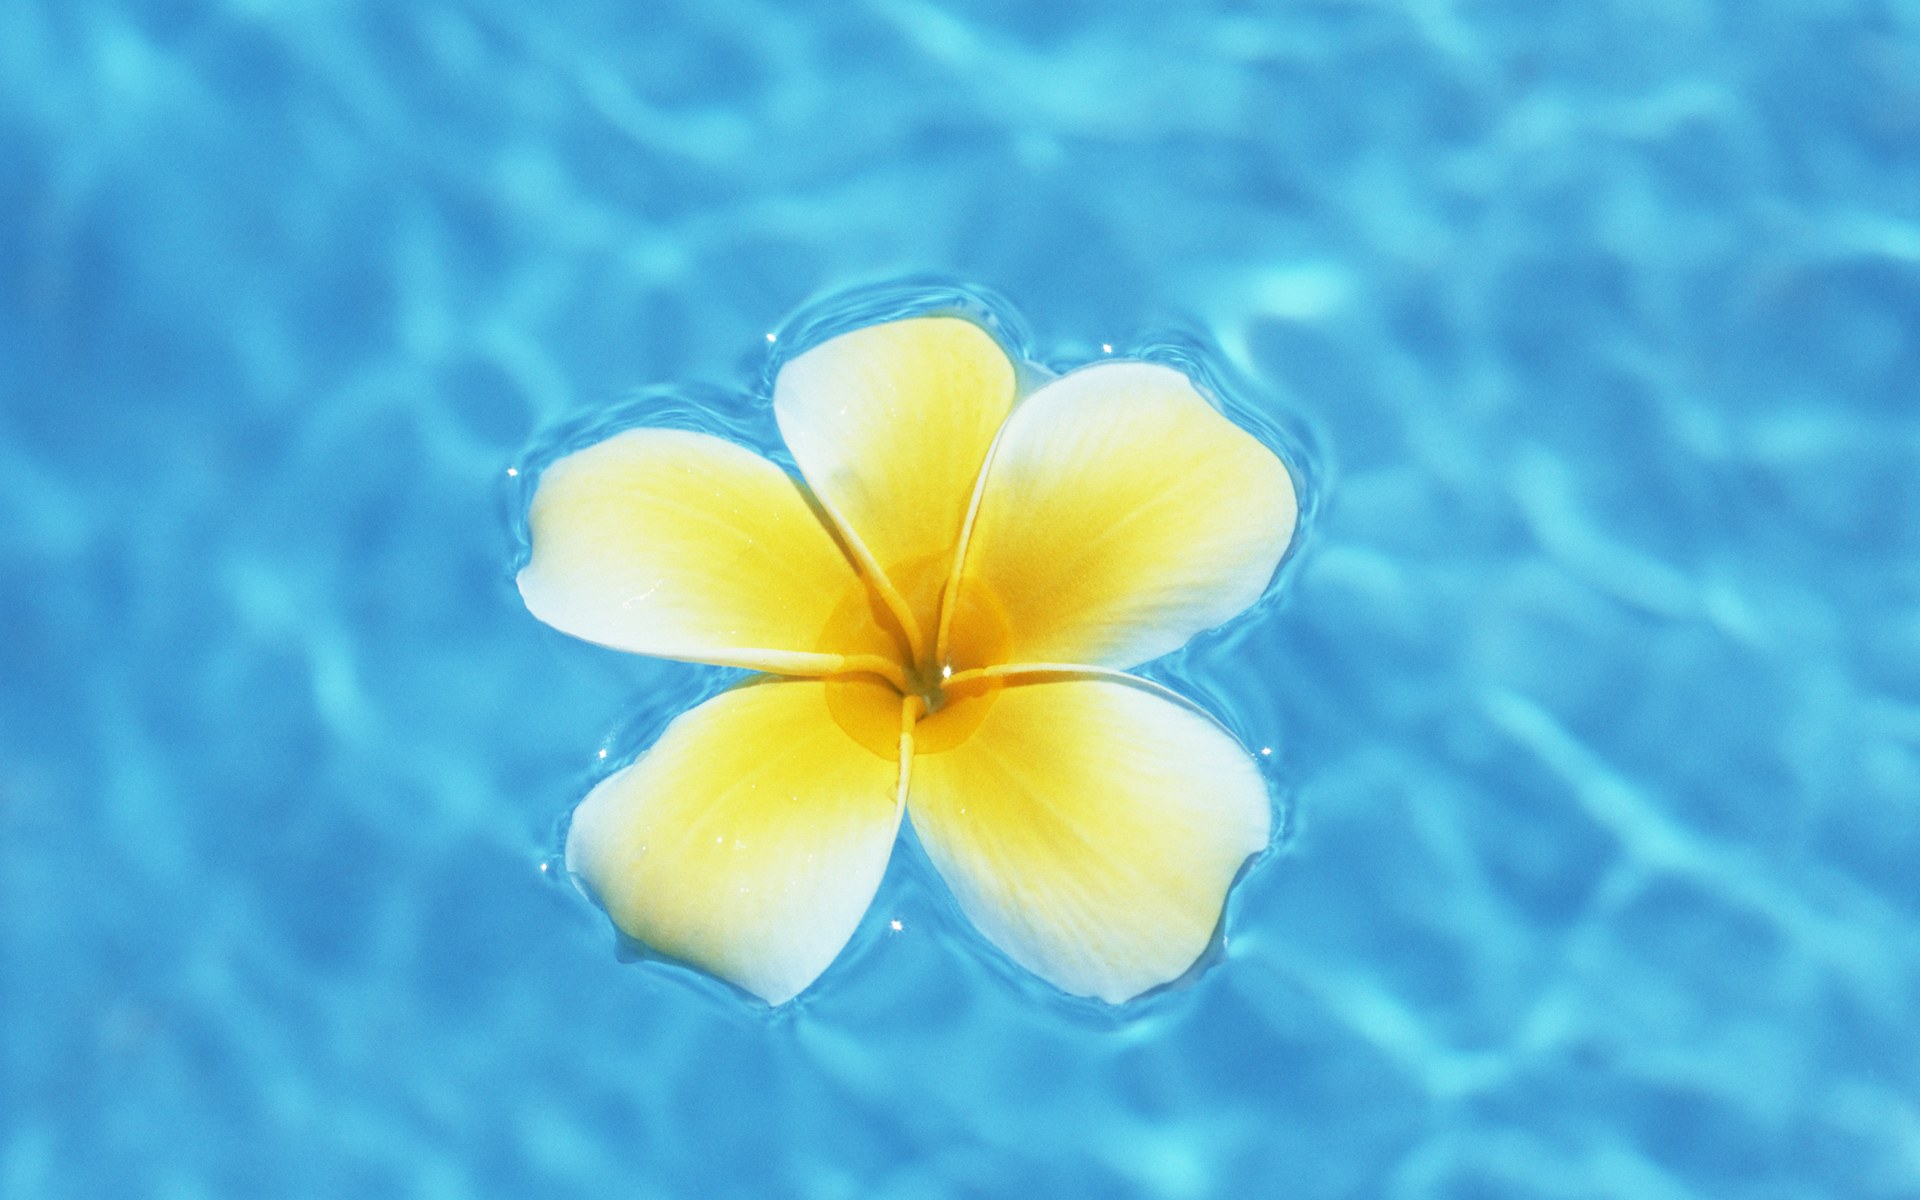 Aquamarine Water And Plumeria Flower Is A Great Wallpaper For Your